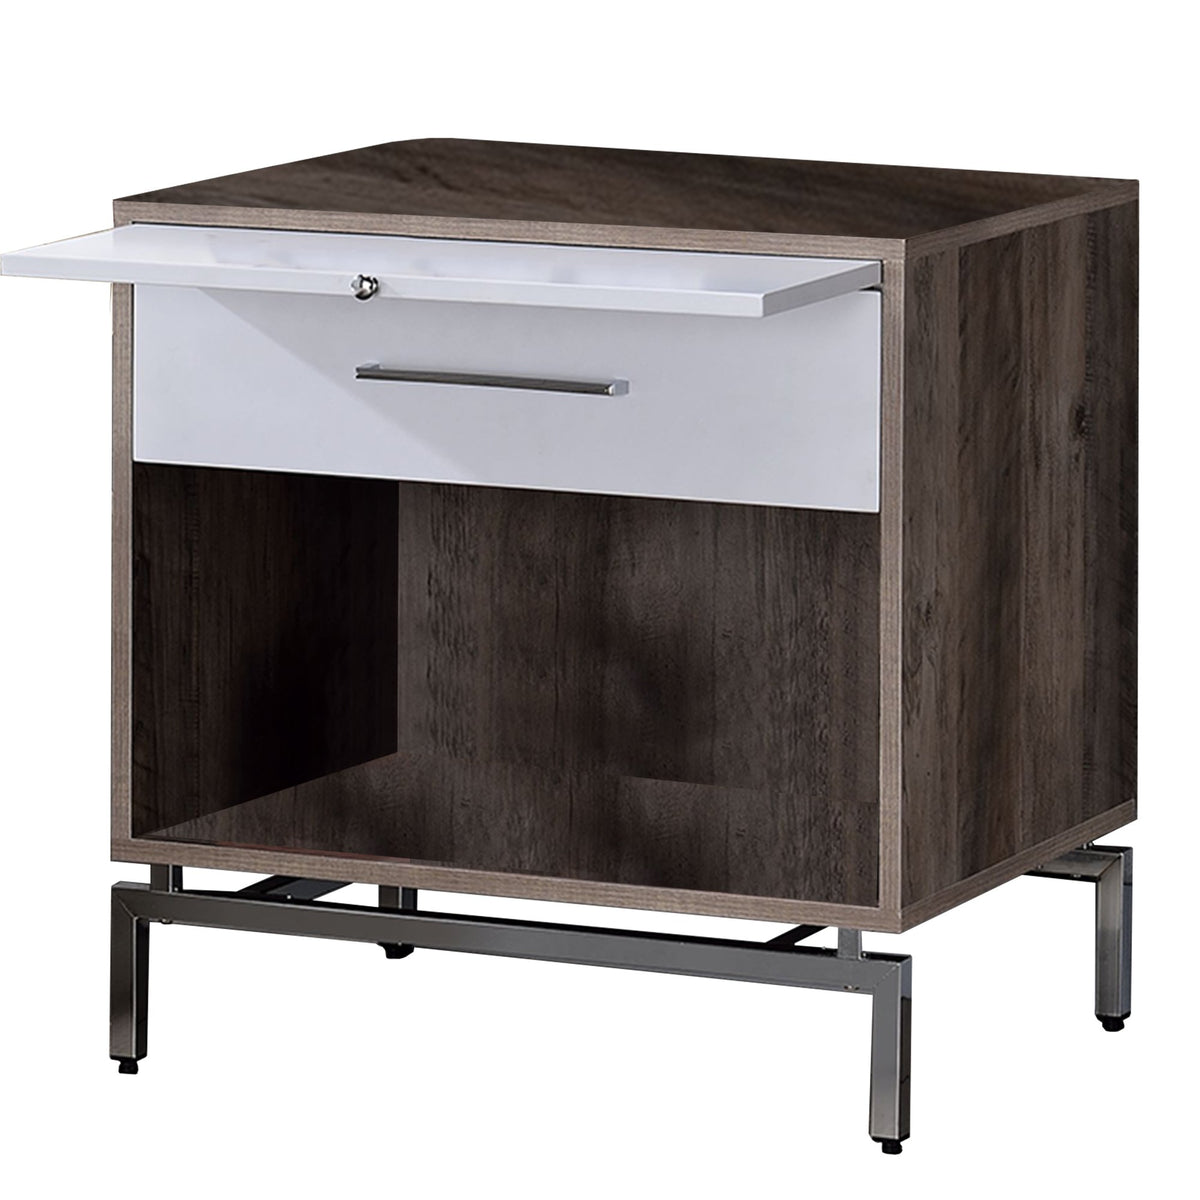 Wooden Accent Table with Open Storage and Pull Out Tray, Brown and White - BM209611